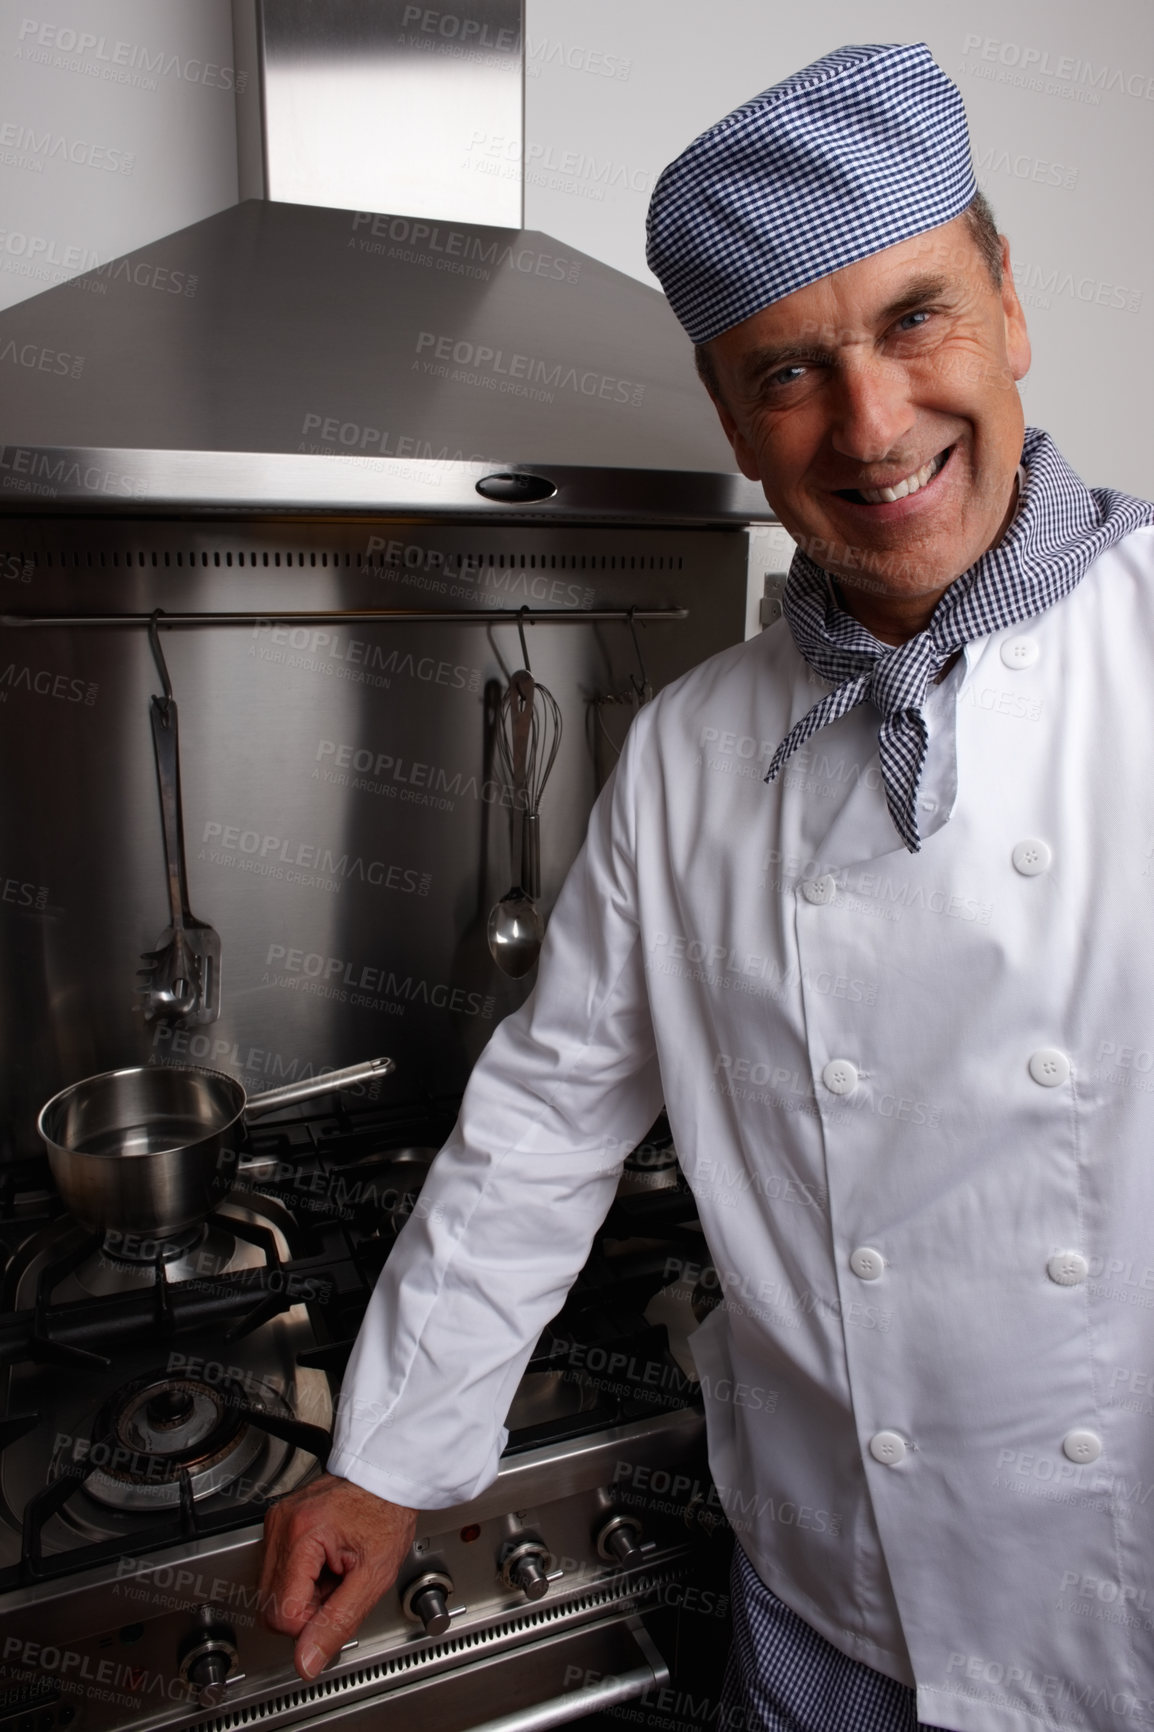 Buy stock photo Portrait of a smiling senior chef standing by gas stove and vent hood